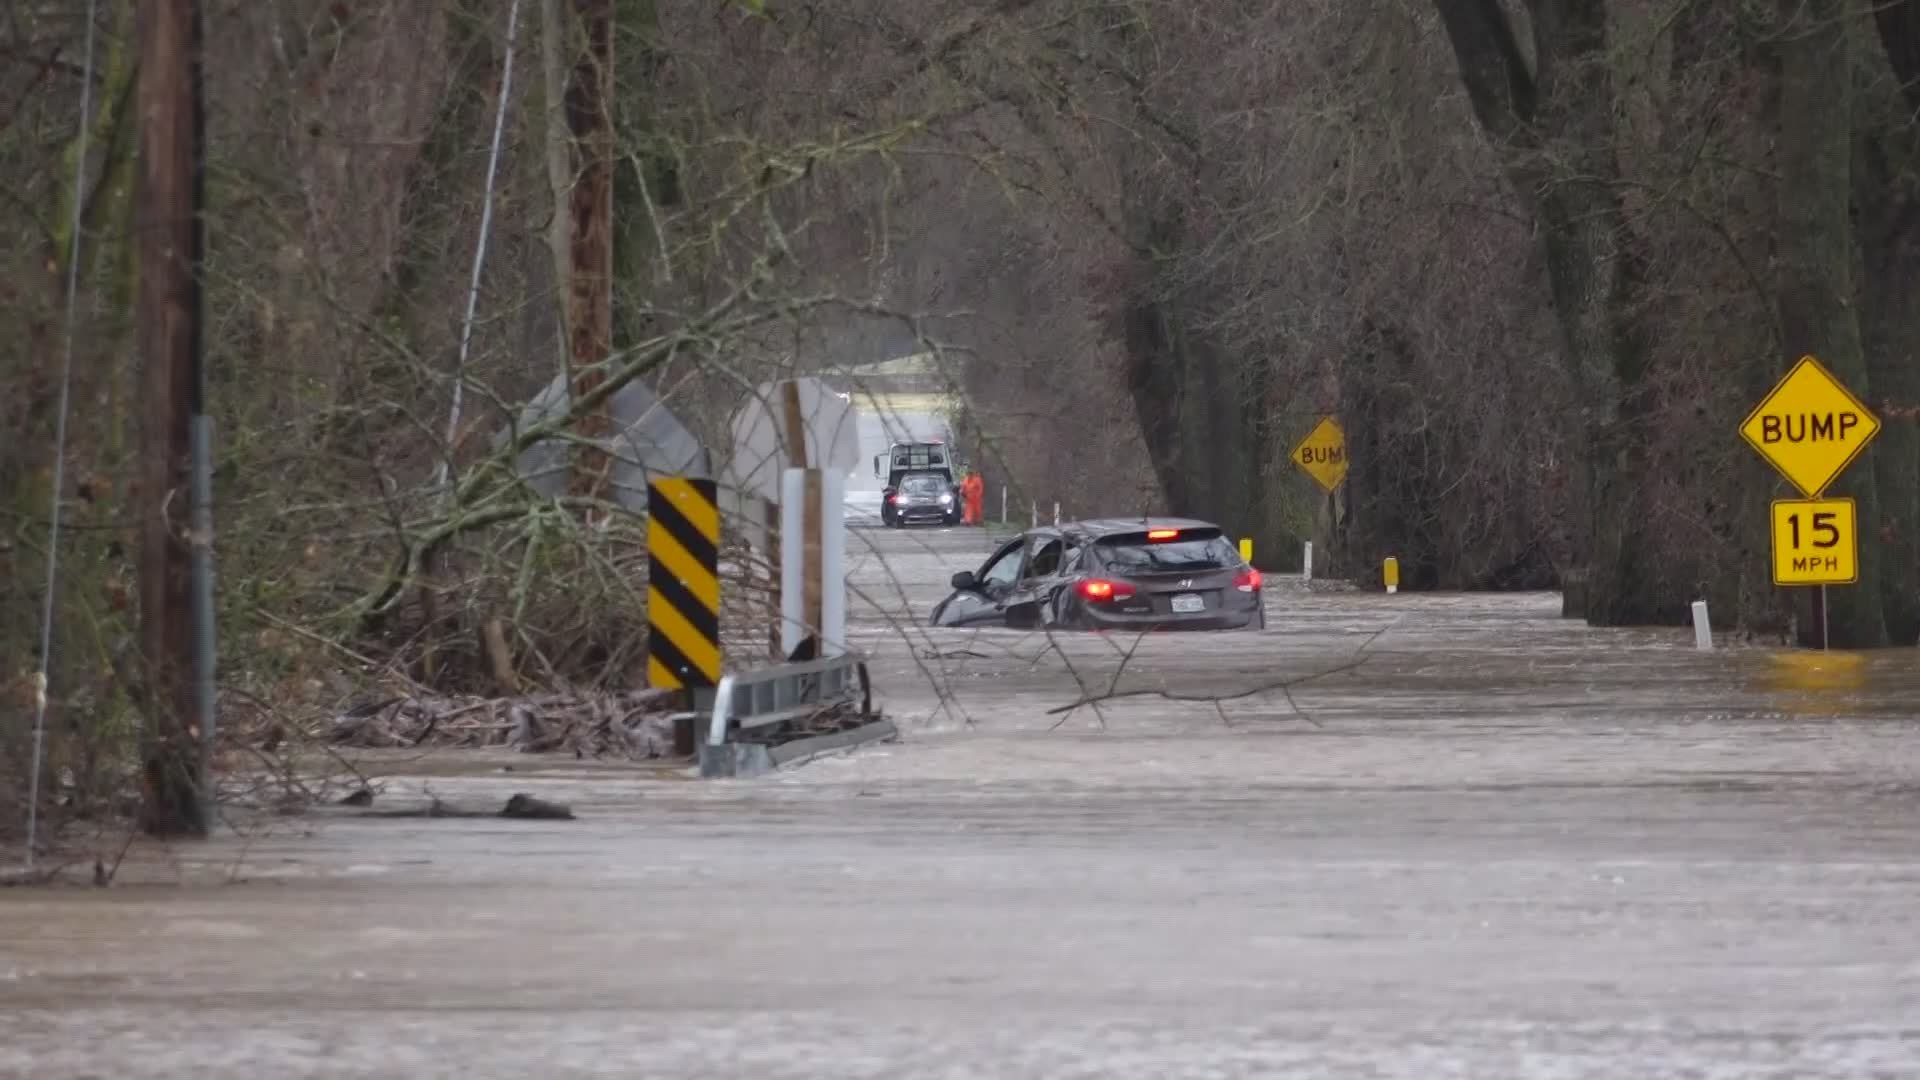 ABC10 Reporter Kevin John was in Sloughhouse Thursday, where crews were called to pull a car out of floodwaters.  With the second of two heavy storms still coursing through Northern California, travelers are encouraged to check conditions before hitting the road.